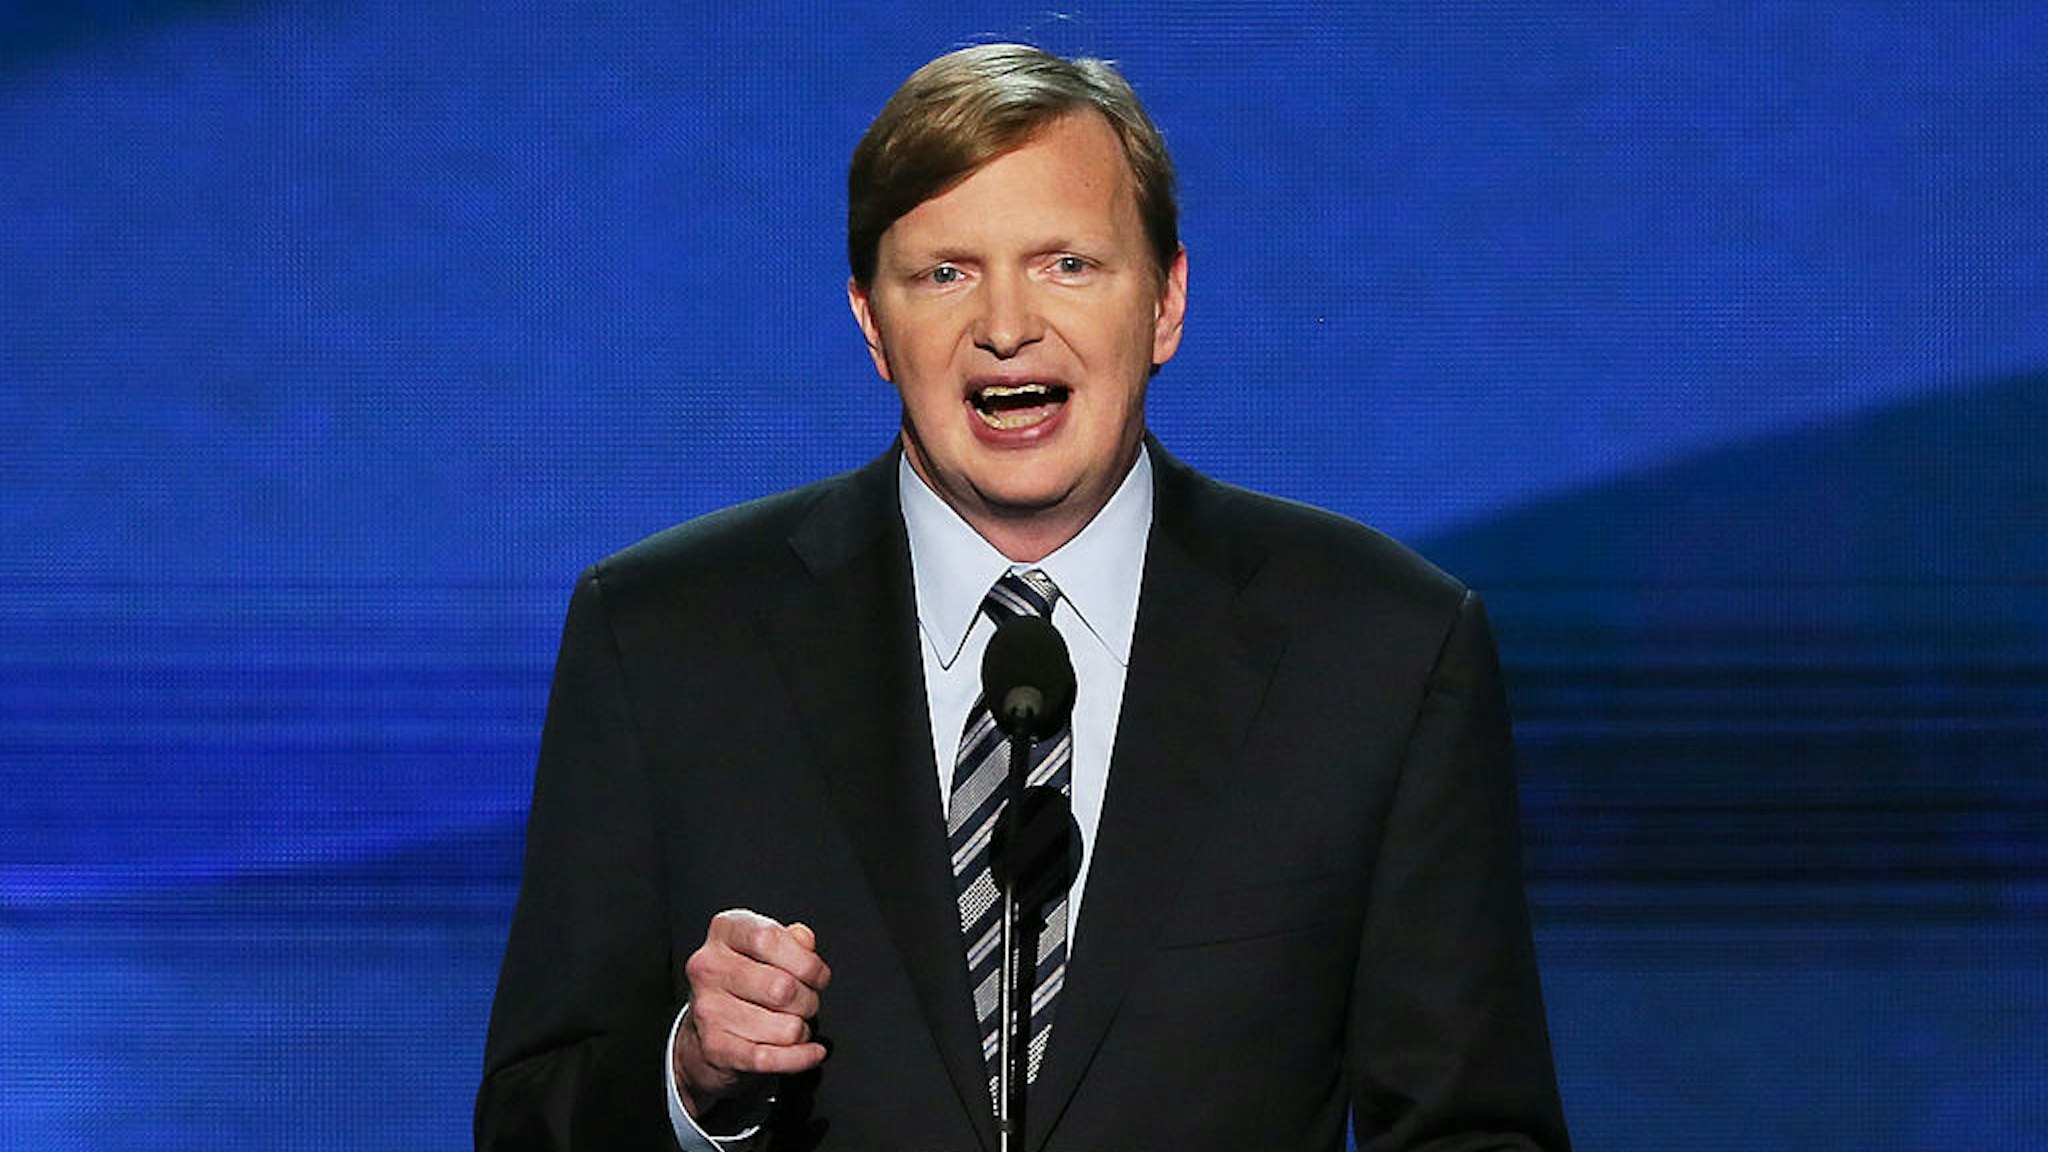 Campaign Manager, Obama for America Jim Messina speaks on stage during the final day of the Democratic National Convention at Time Warner Cable Arena on September 6, 2012 in Charlotte, North Carolina.